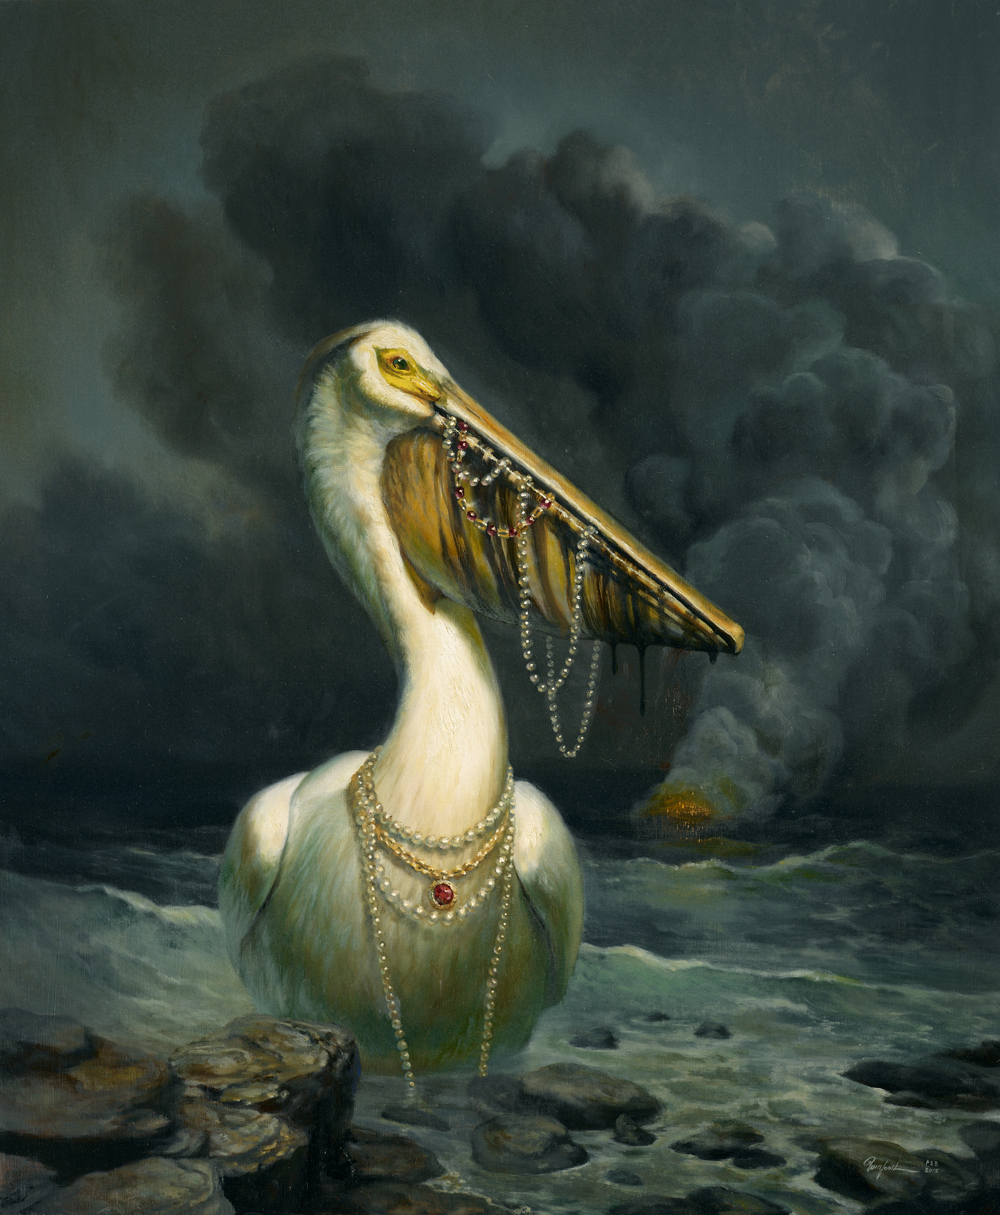 contemporary realism wildlife art - Martin Wittfooth, "The Spoils," 39 x 33 inches, oil on linen, 2012